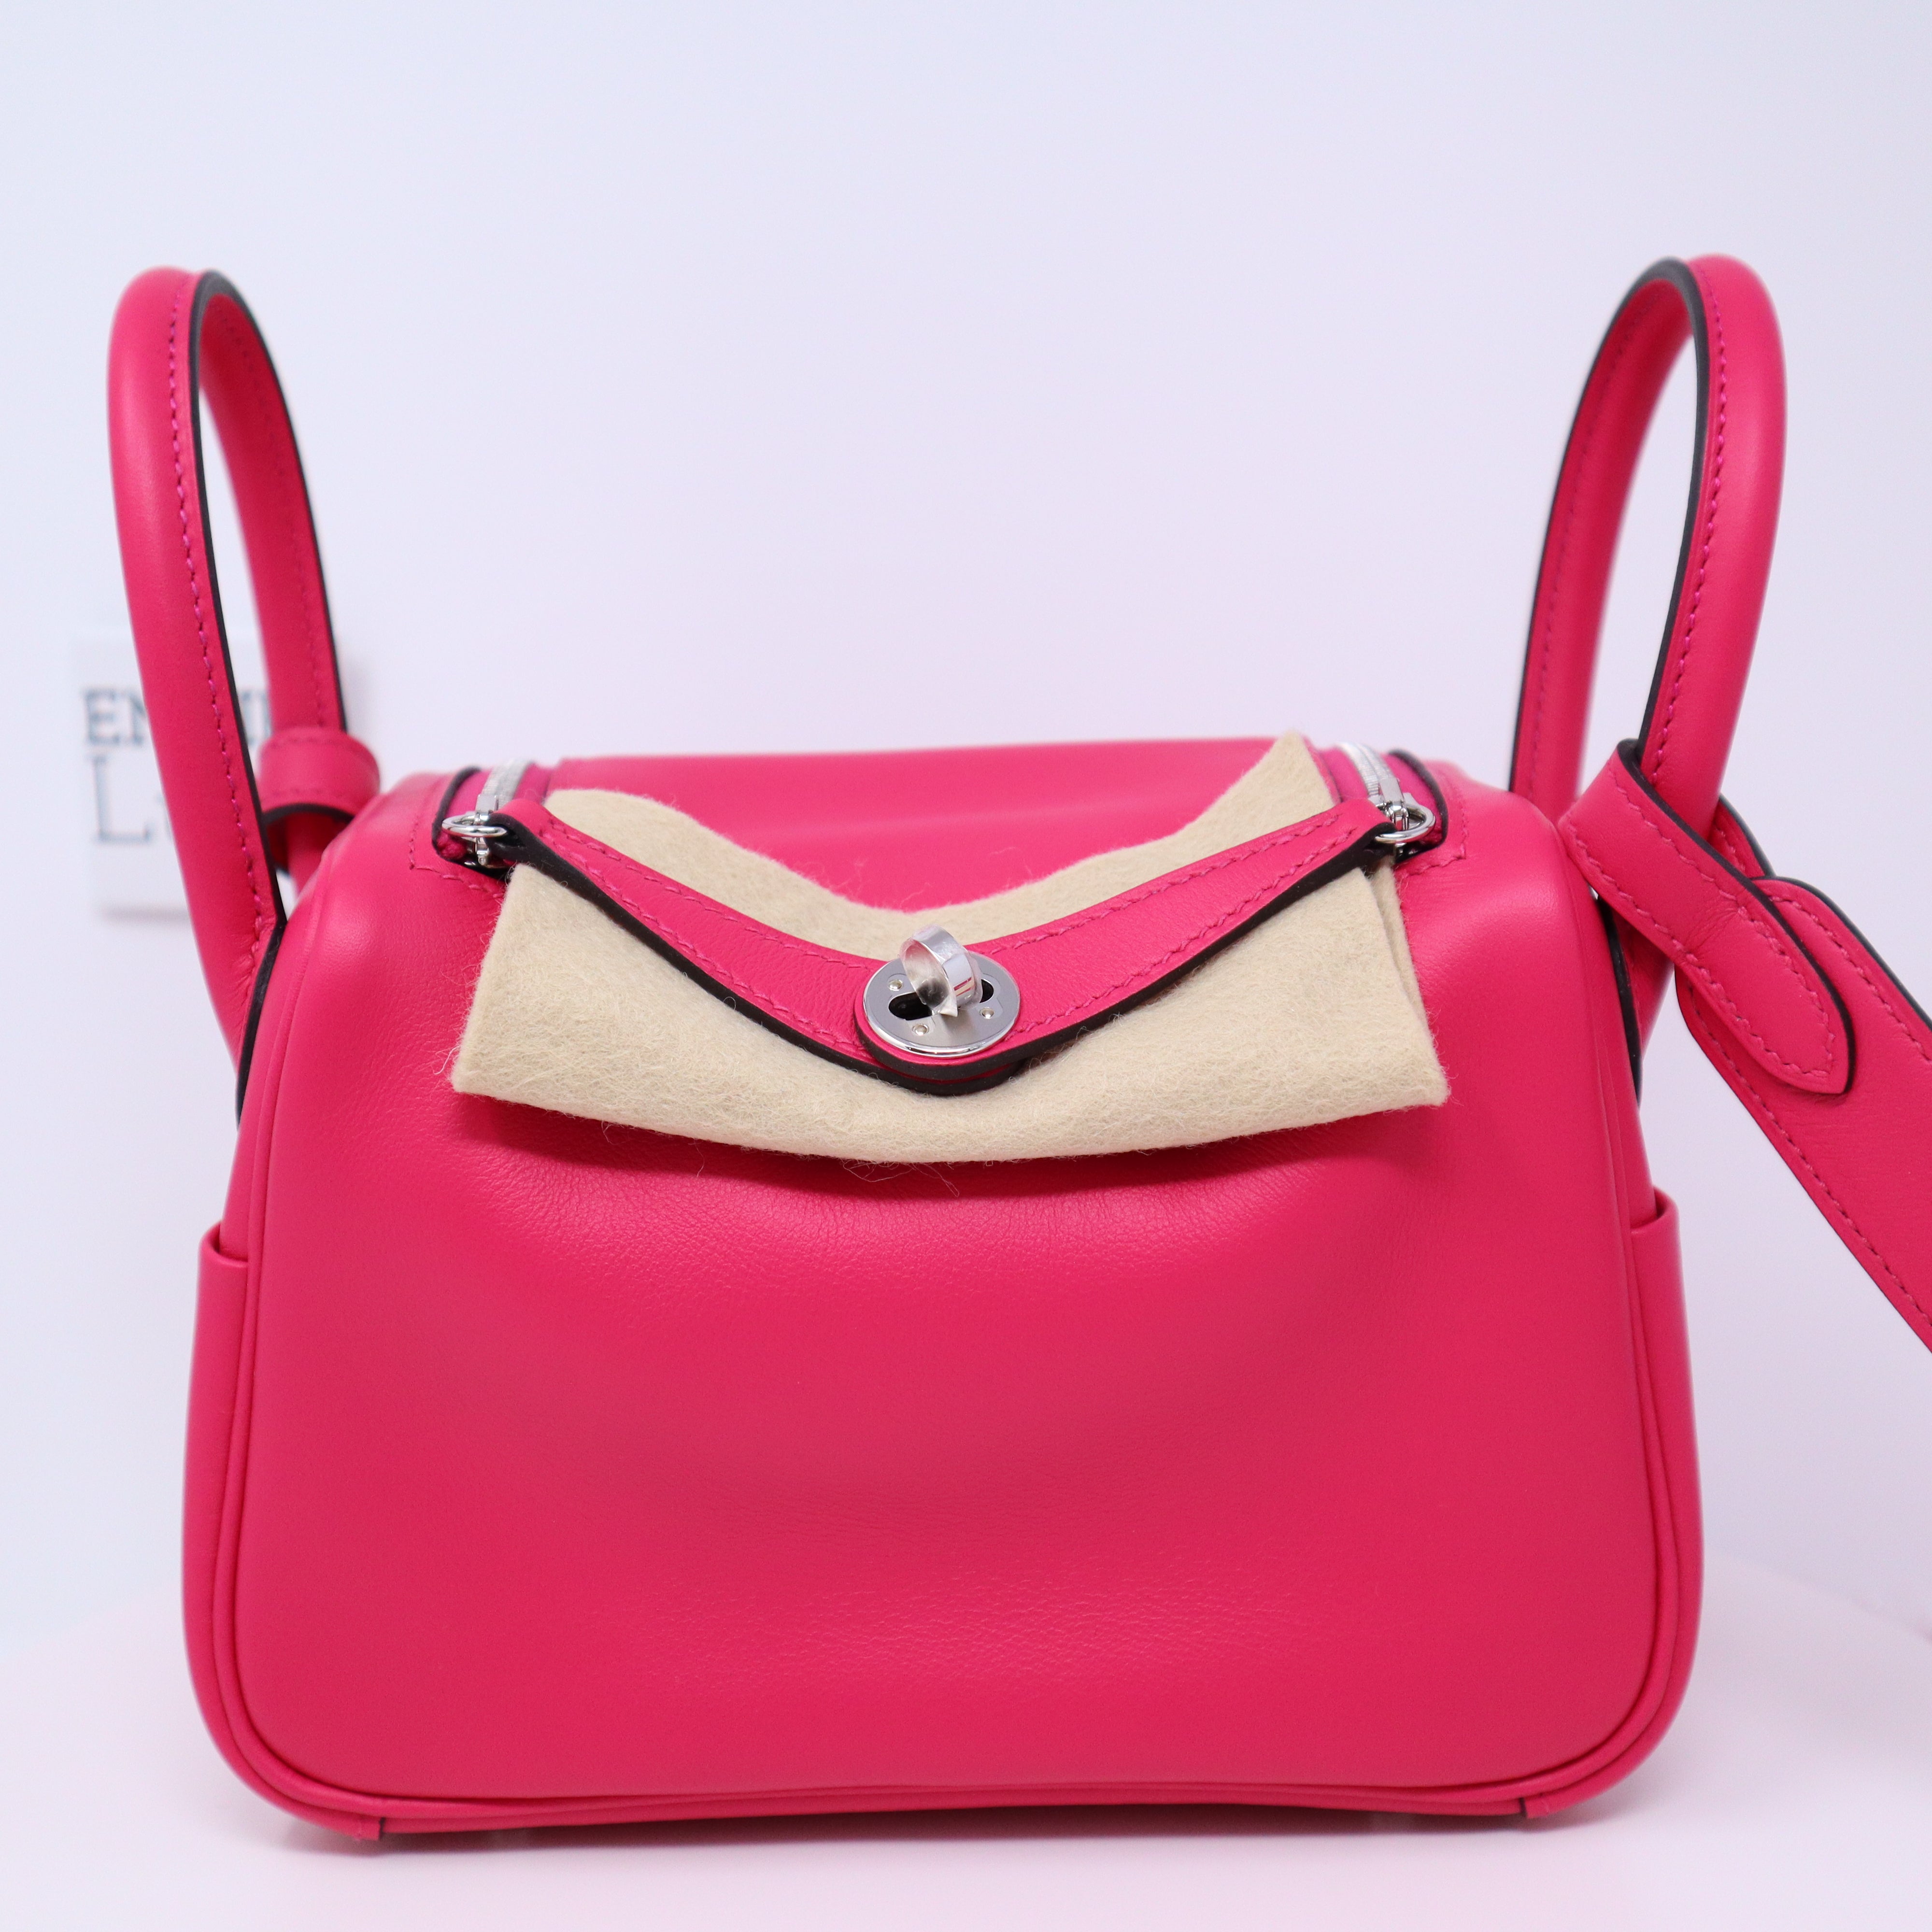 Ladybaggss - New color.. Hermes mini lindy rose texas. Good deal. Rm3x,xxx  only. Whatsapp +60143580905 for ur purchase